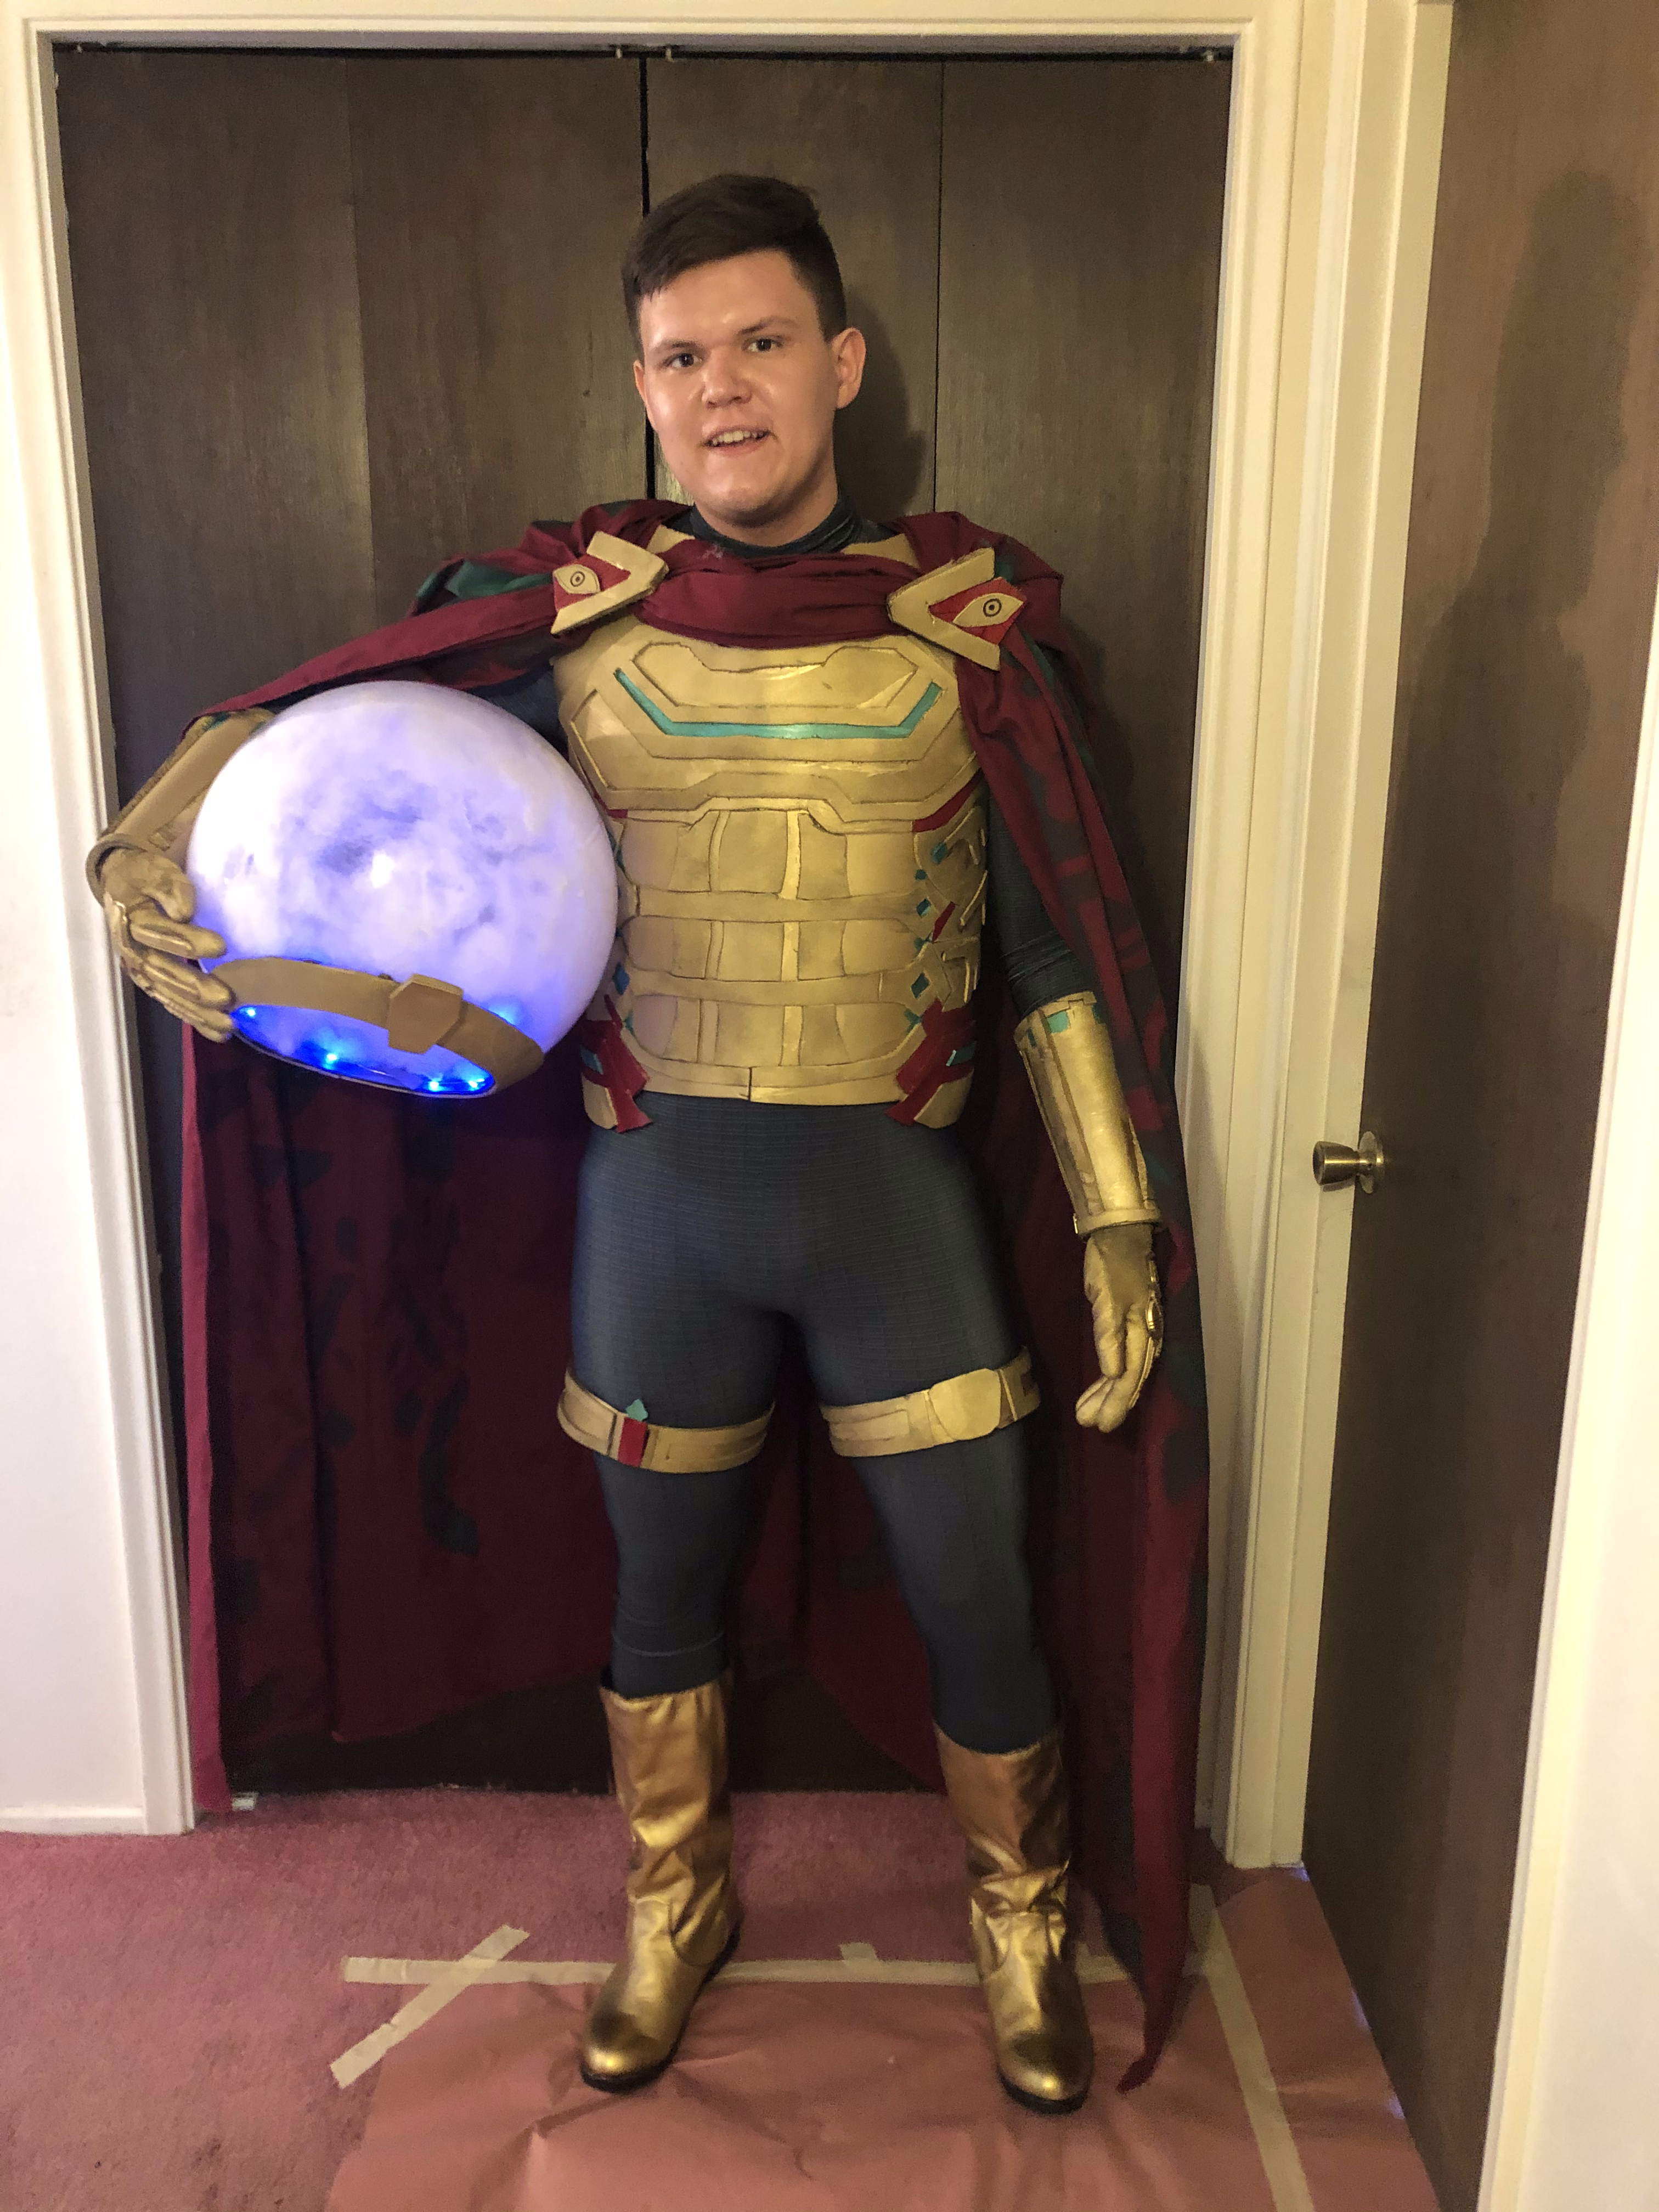 Stephen Dressed up as Mysterio